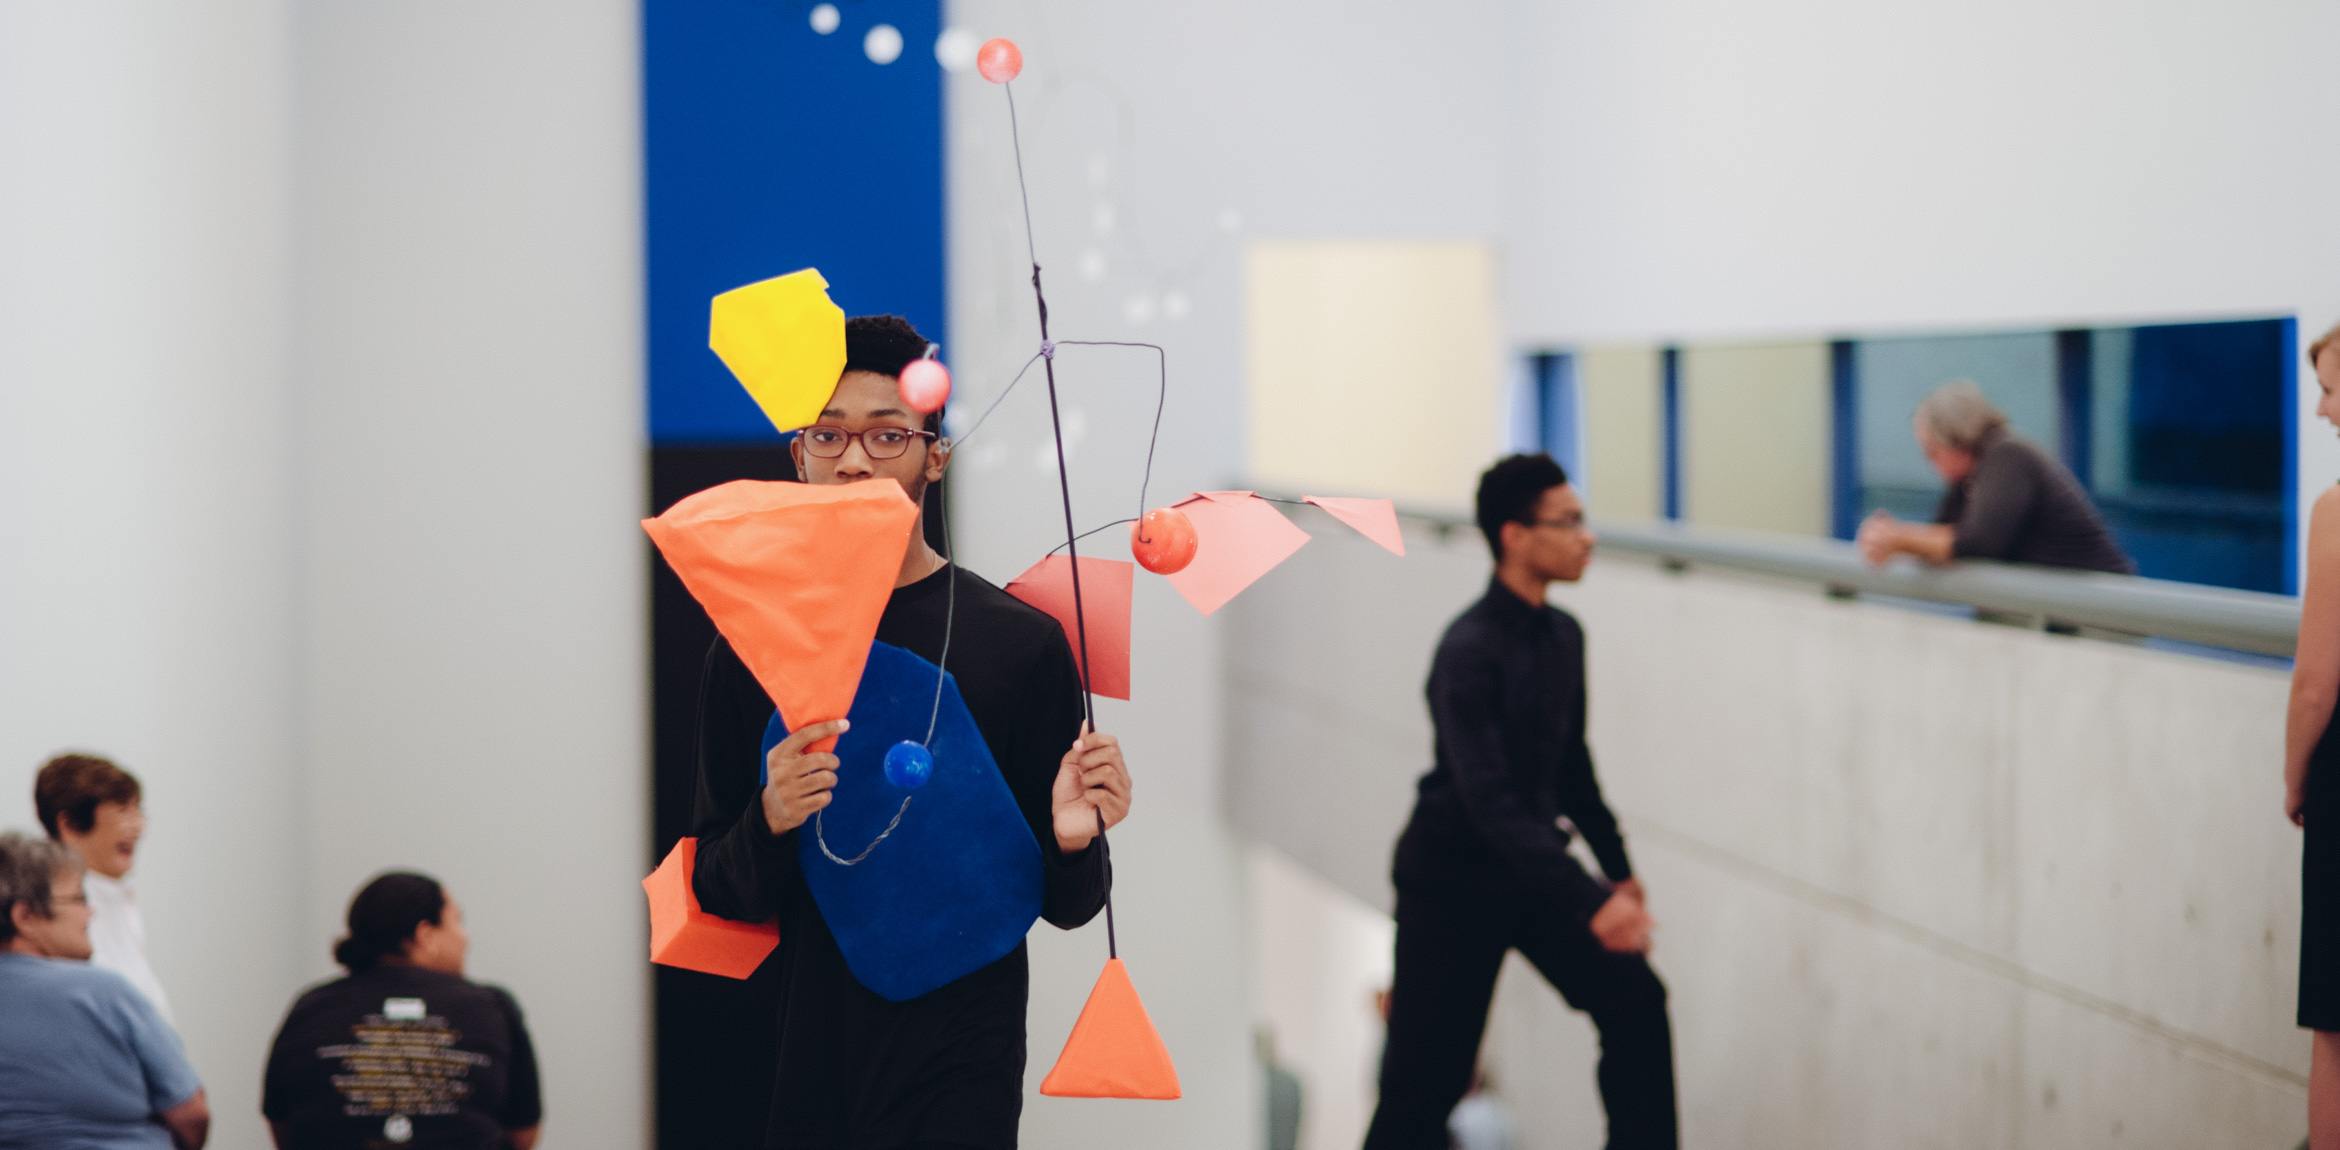 A student performs for an audience in the main gallery holding mobile inspired by Calder's work.